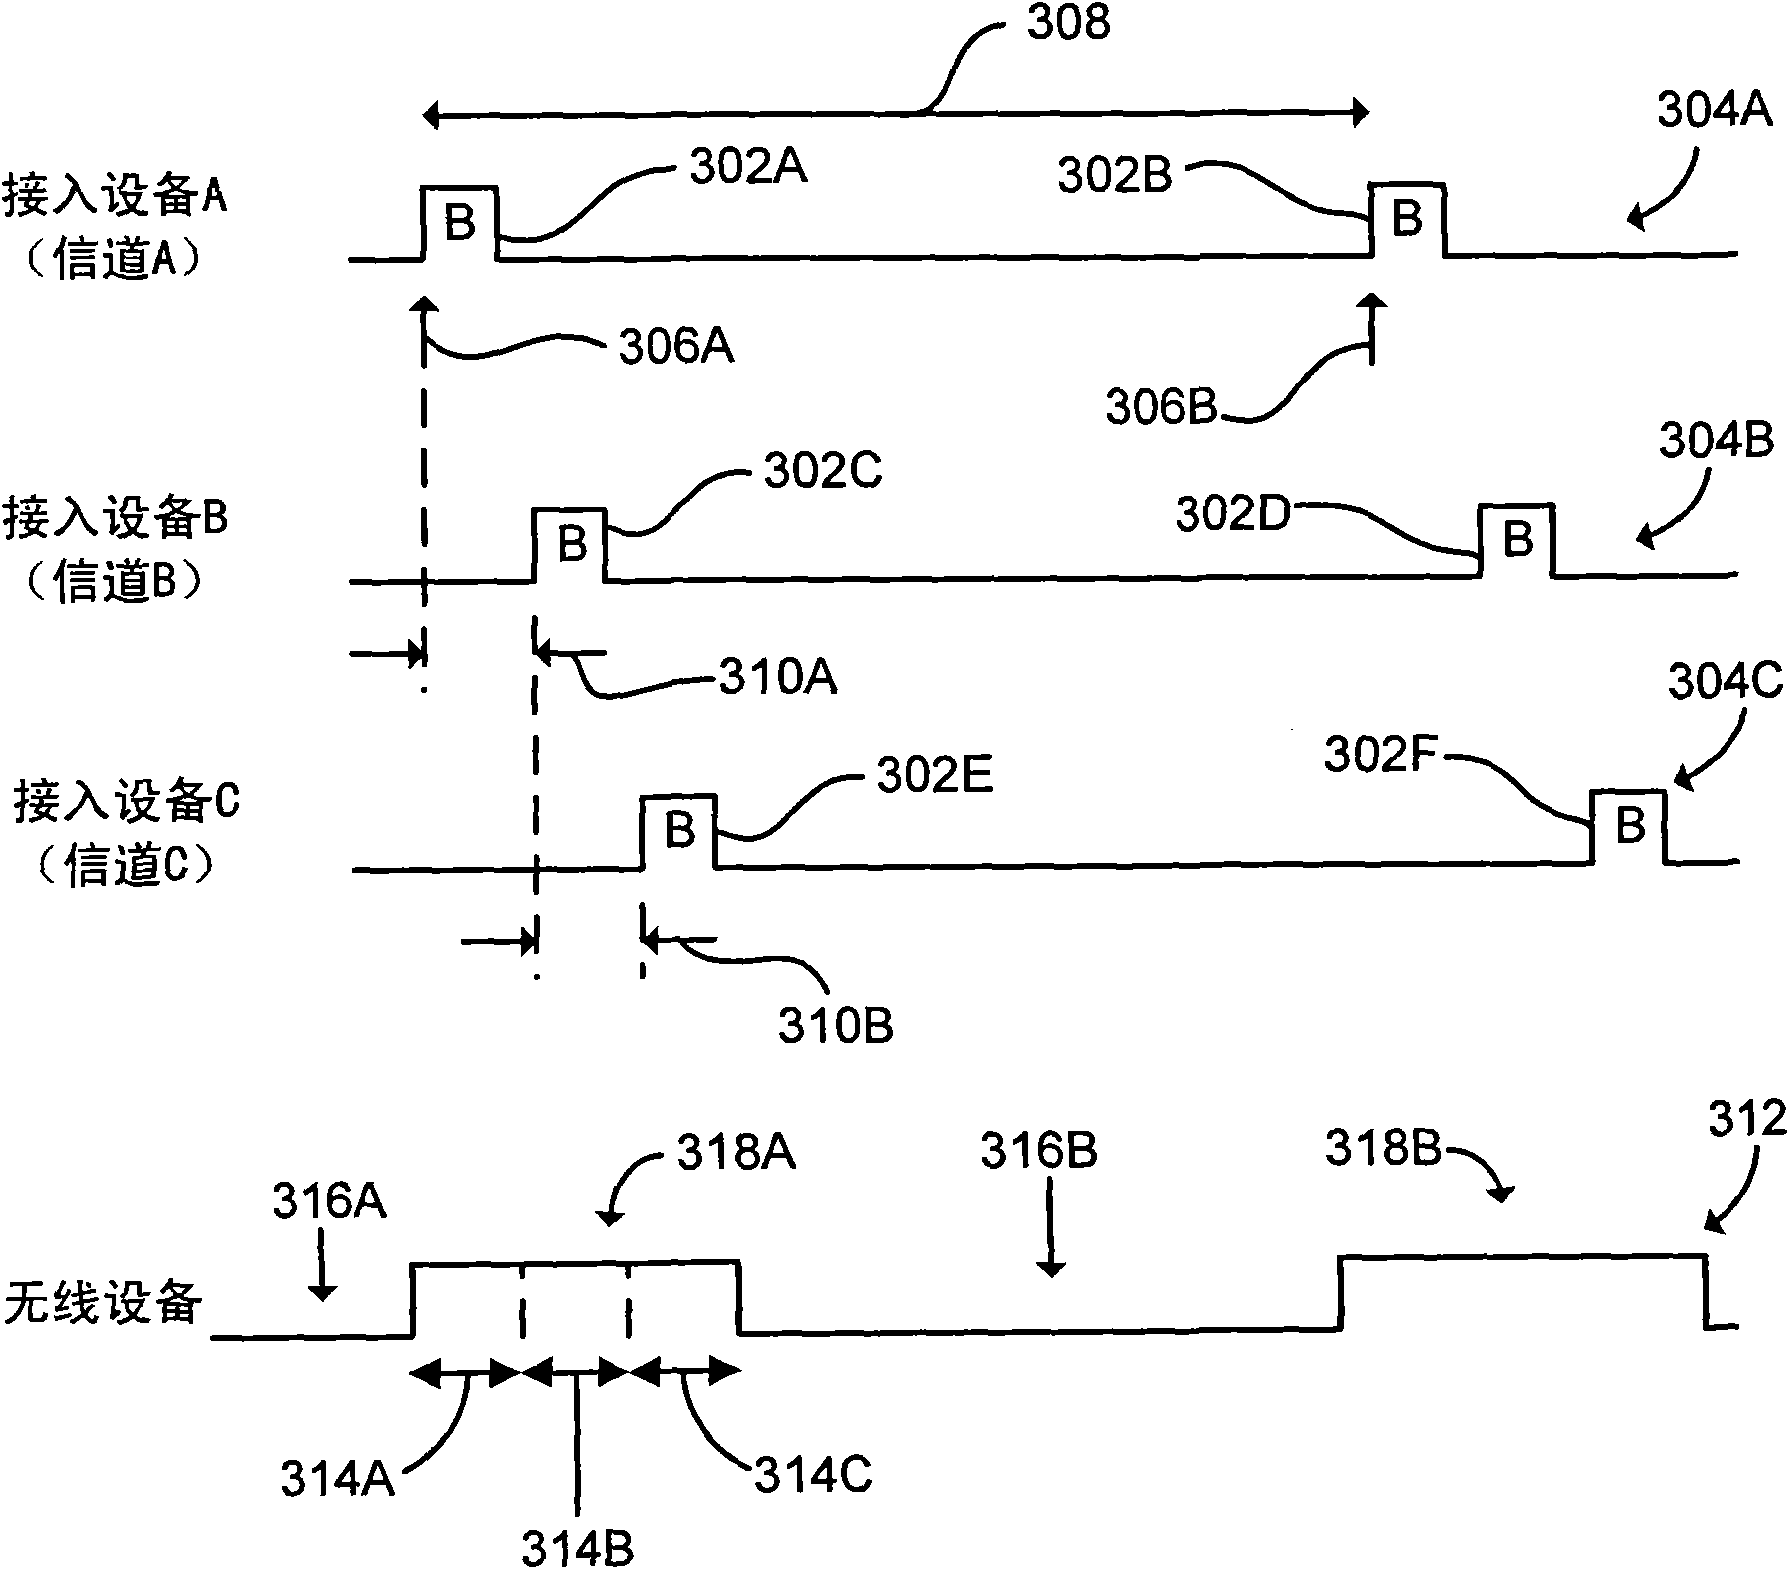 Neighbor discovery in a wireless system